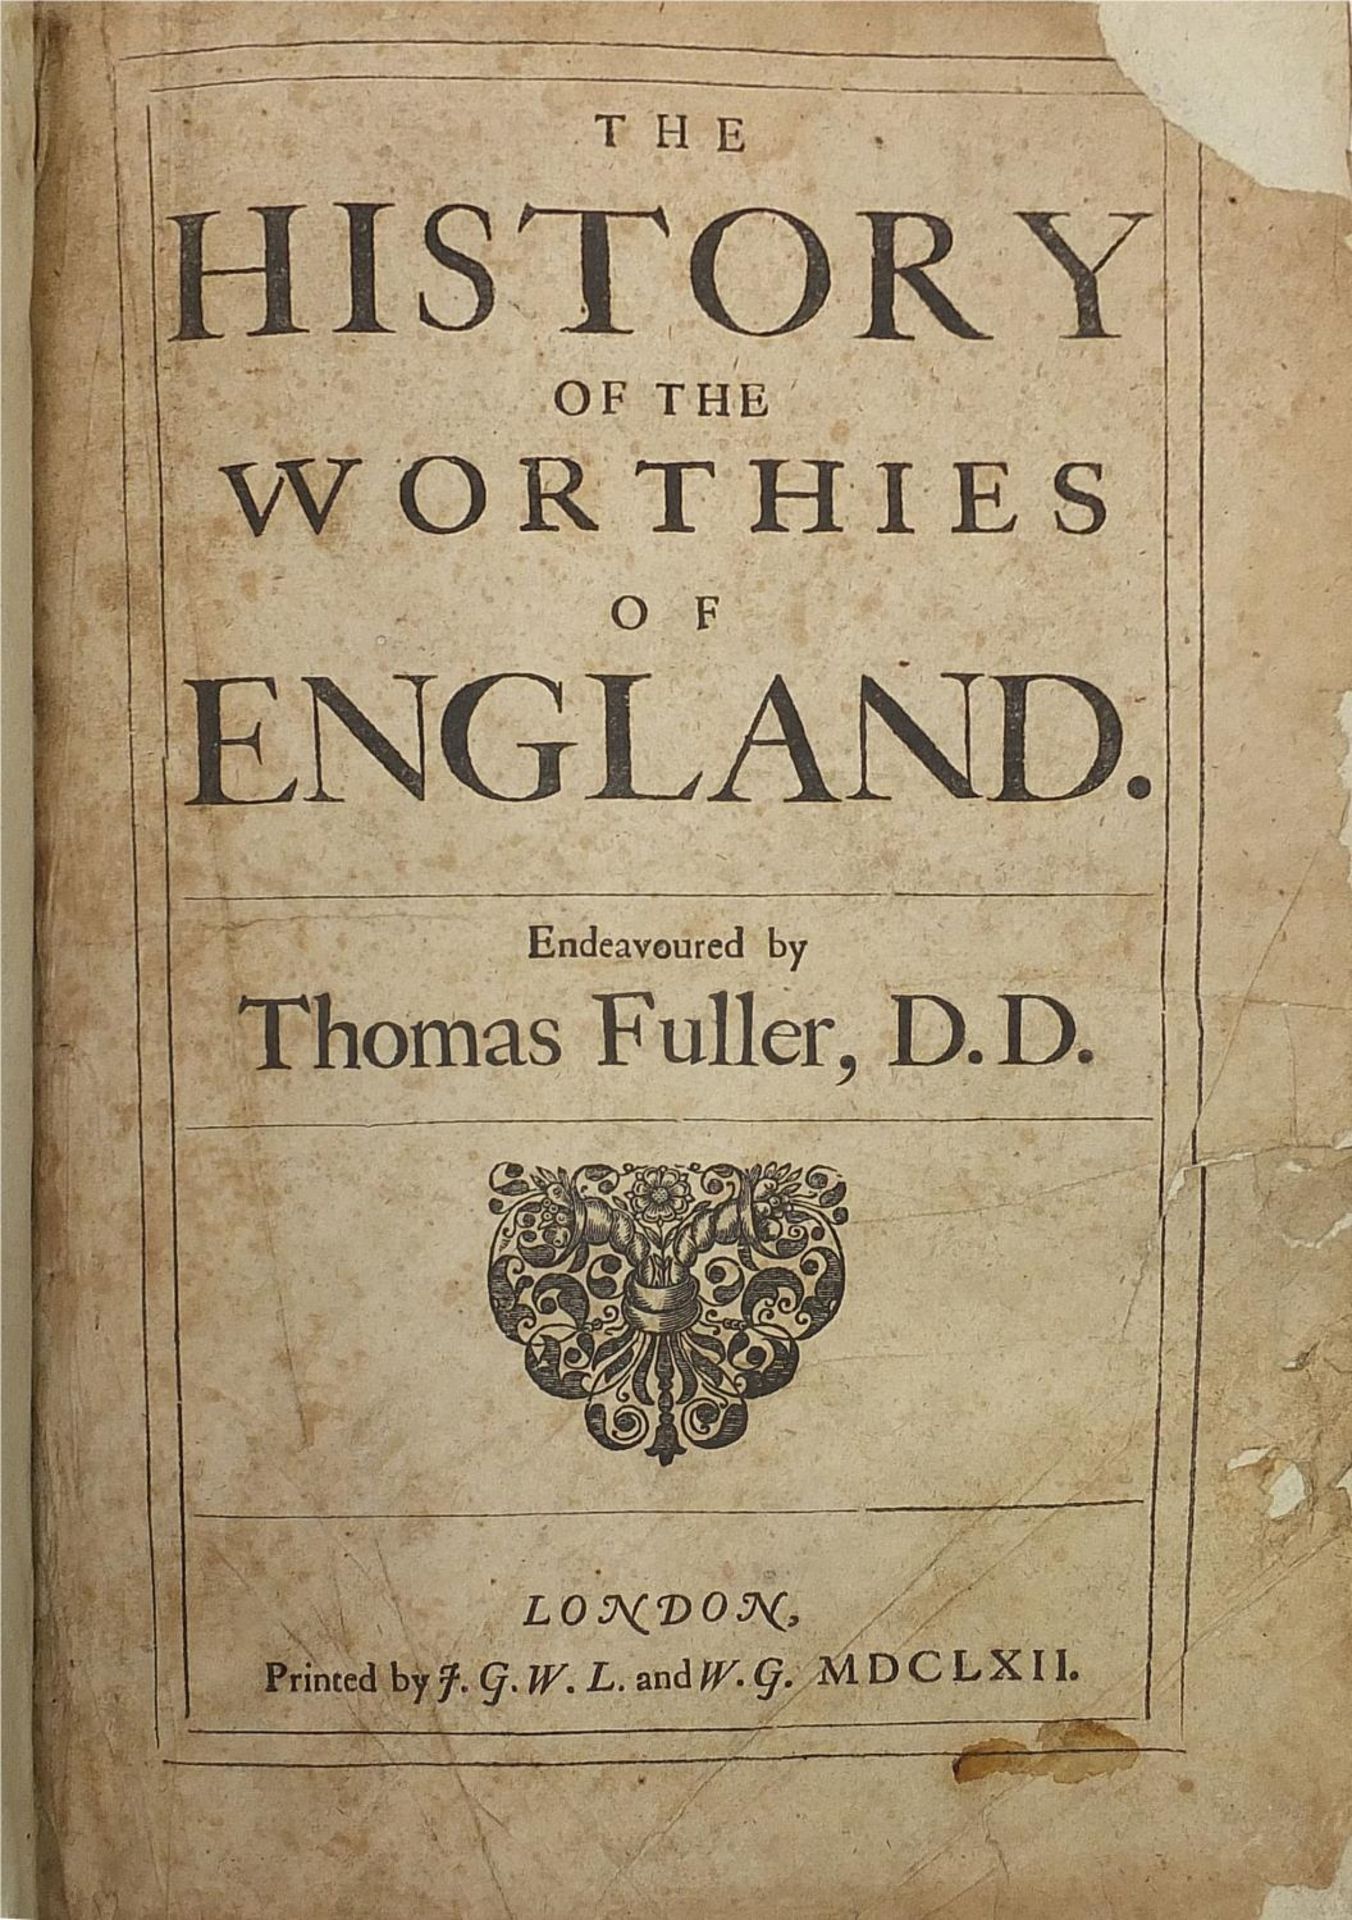 The history of the Worthies of England by Thomas Fuller, 17th century leather bound hardback book - Image 3 of 6